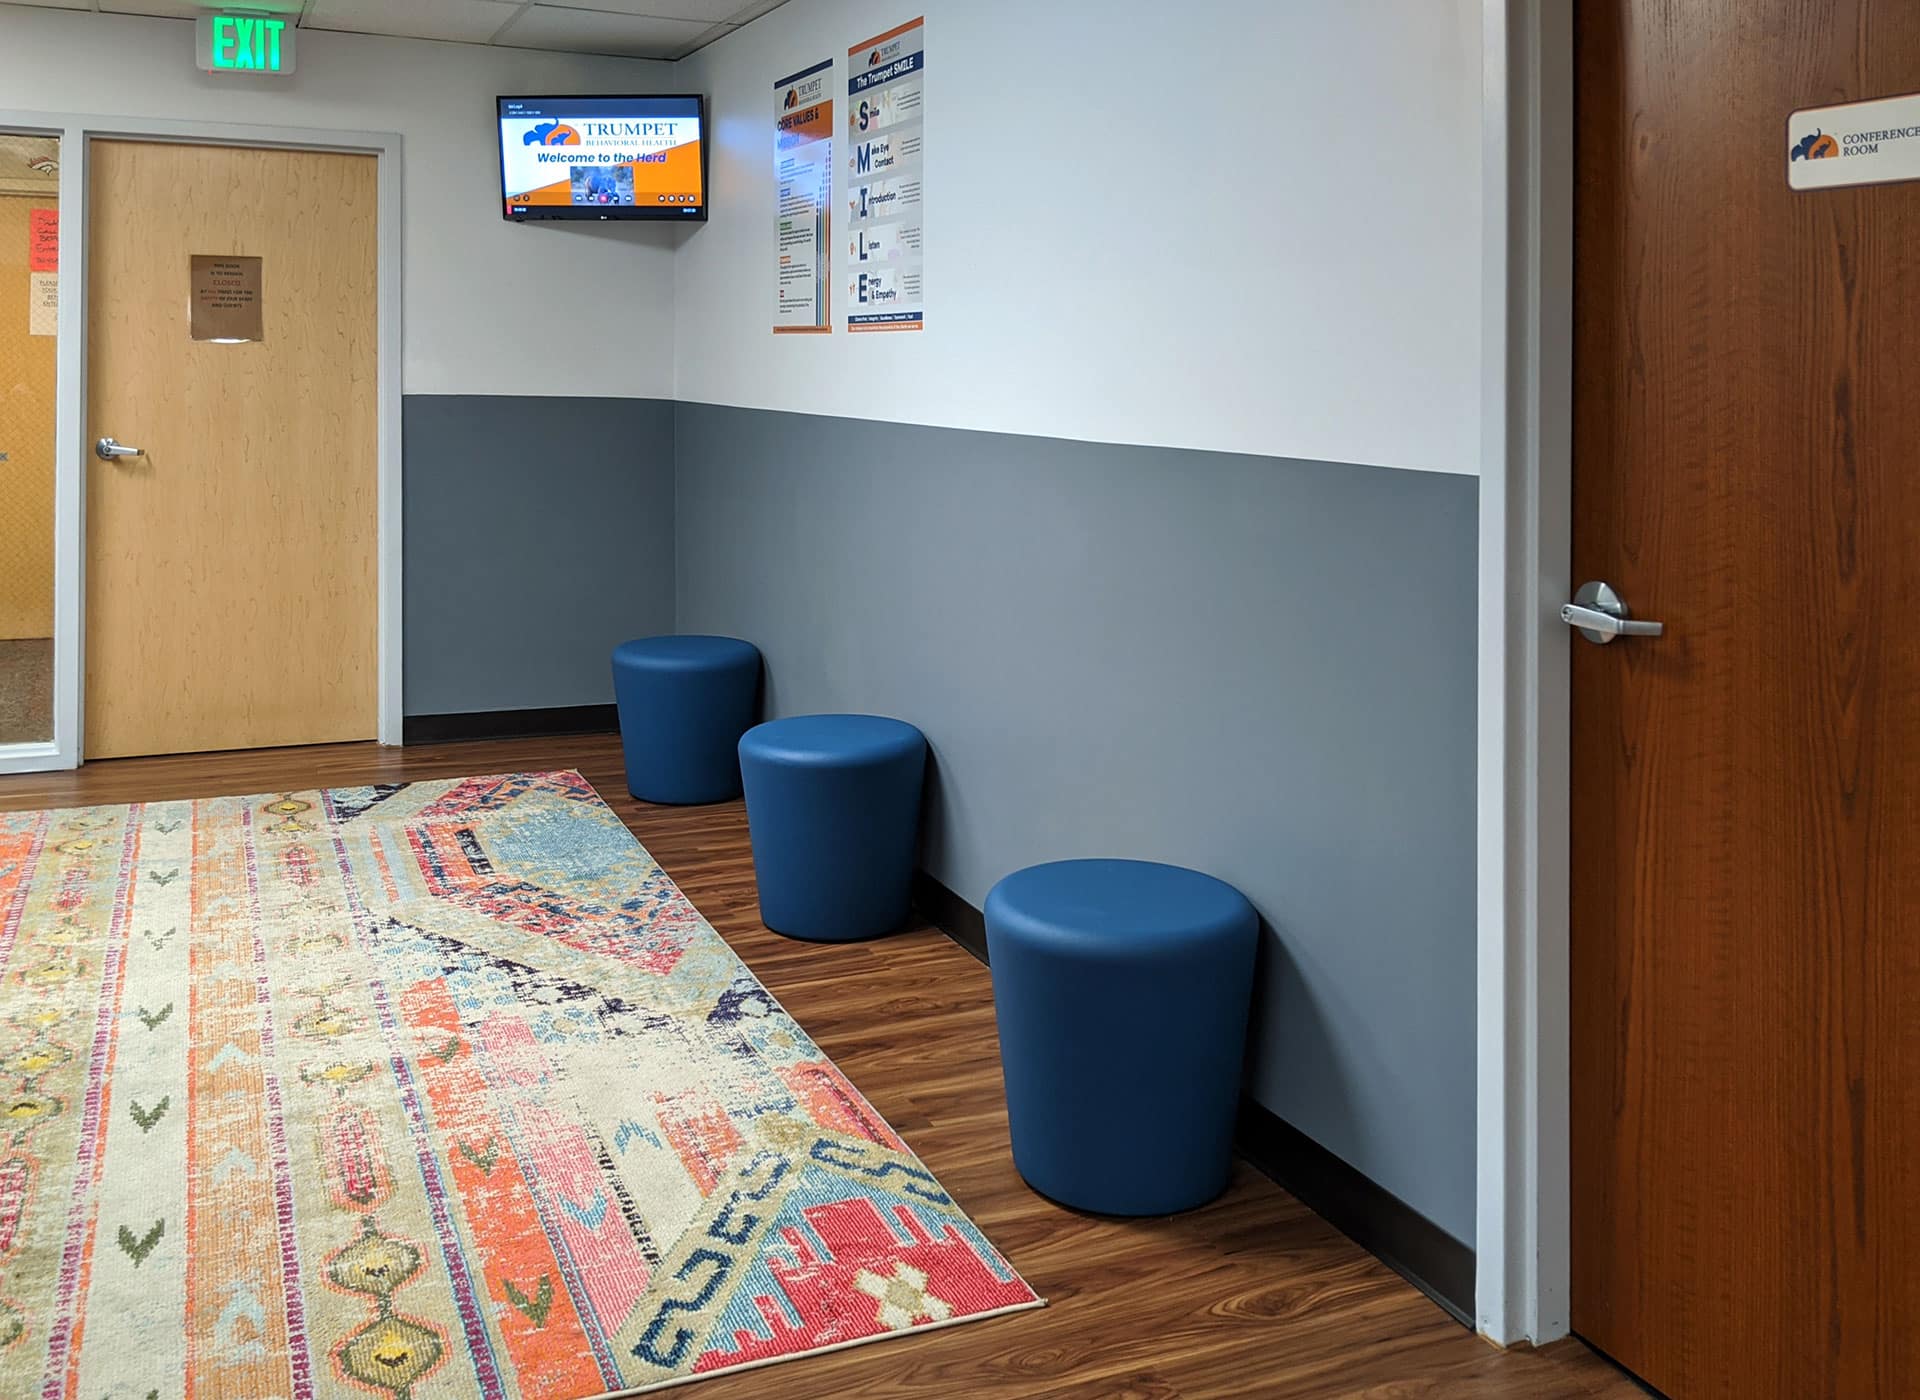 The hallway in BlueSprig autism centers features a comfortable rug and small blue stools.